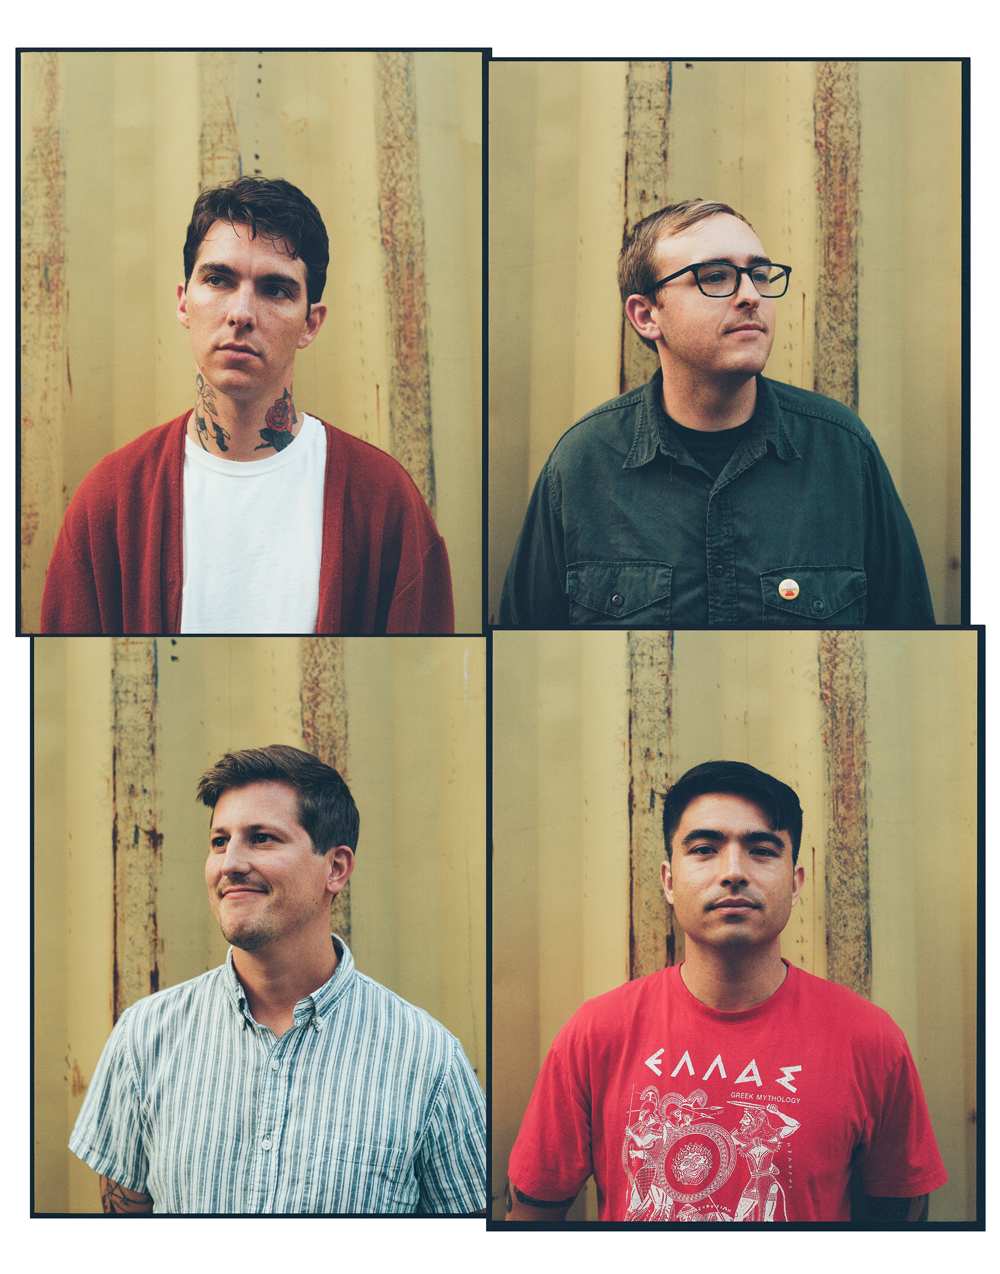 Joyce Manor Is Excited to Be Bored